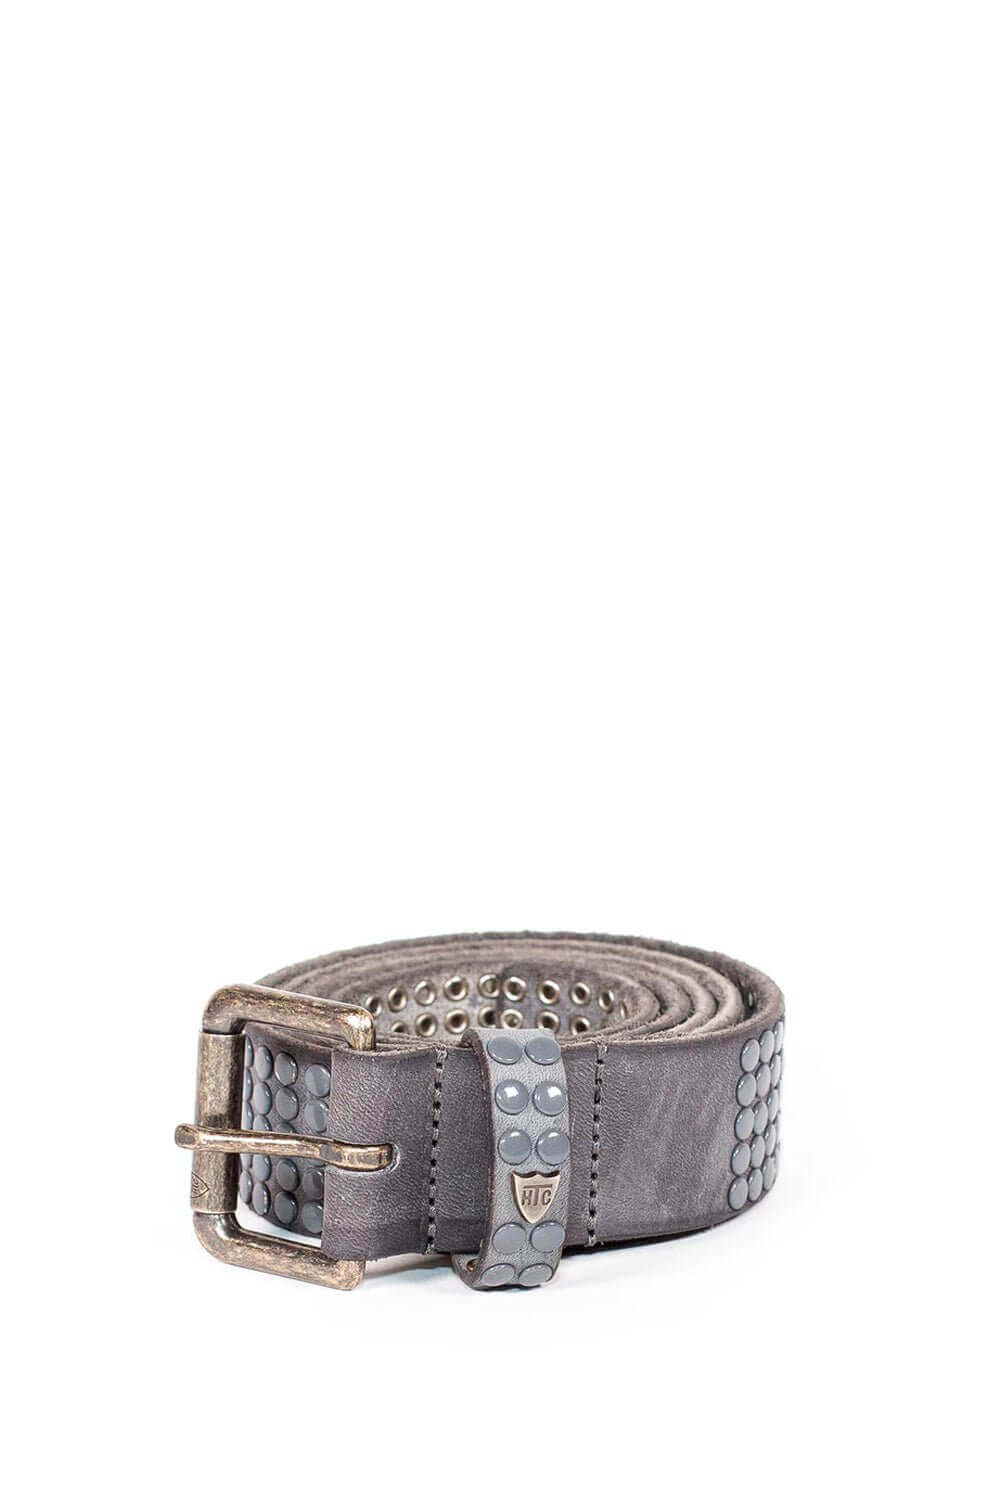 5.000 STUDS COLOR BLOCK BELT Leather belt with varnish studs, brass buckle, studded zamac belt loop with HTC logo rivet. Height: 3,5 cm. Made in Italy. HTC LOS ANGELES